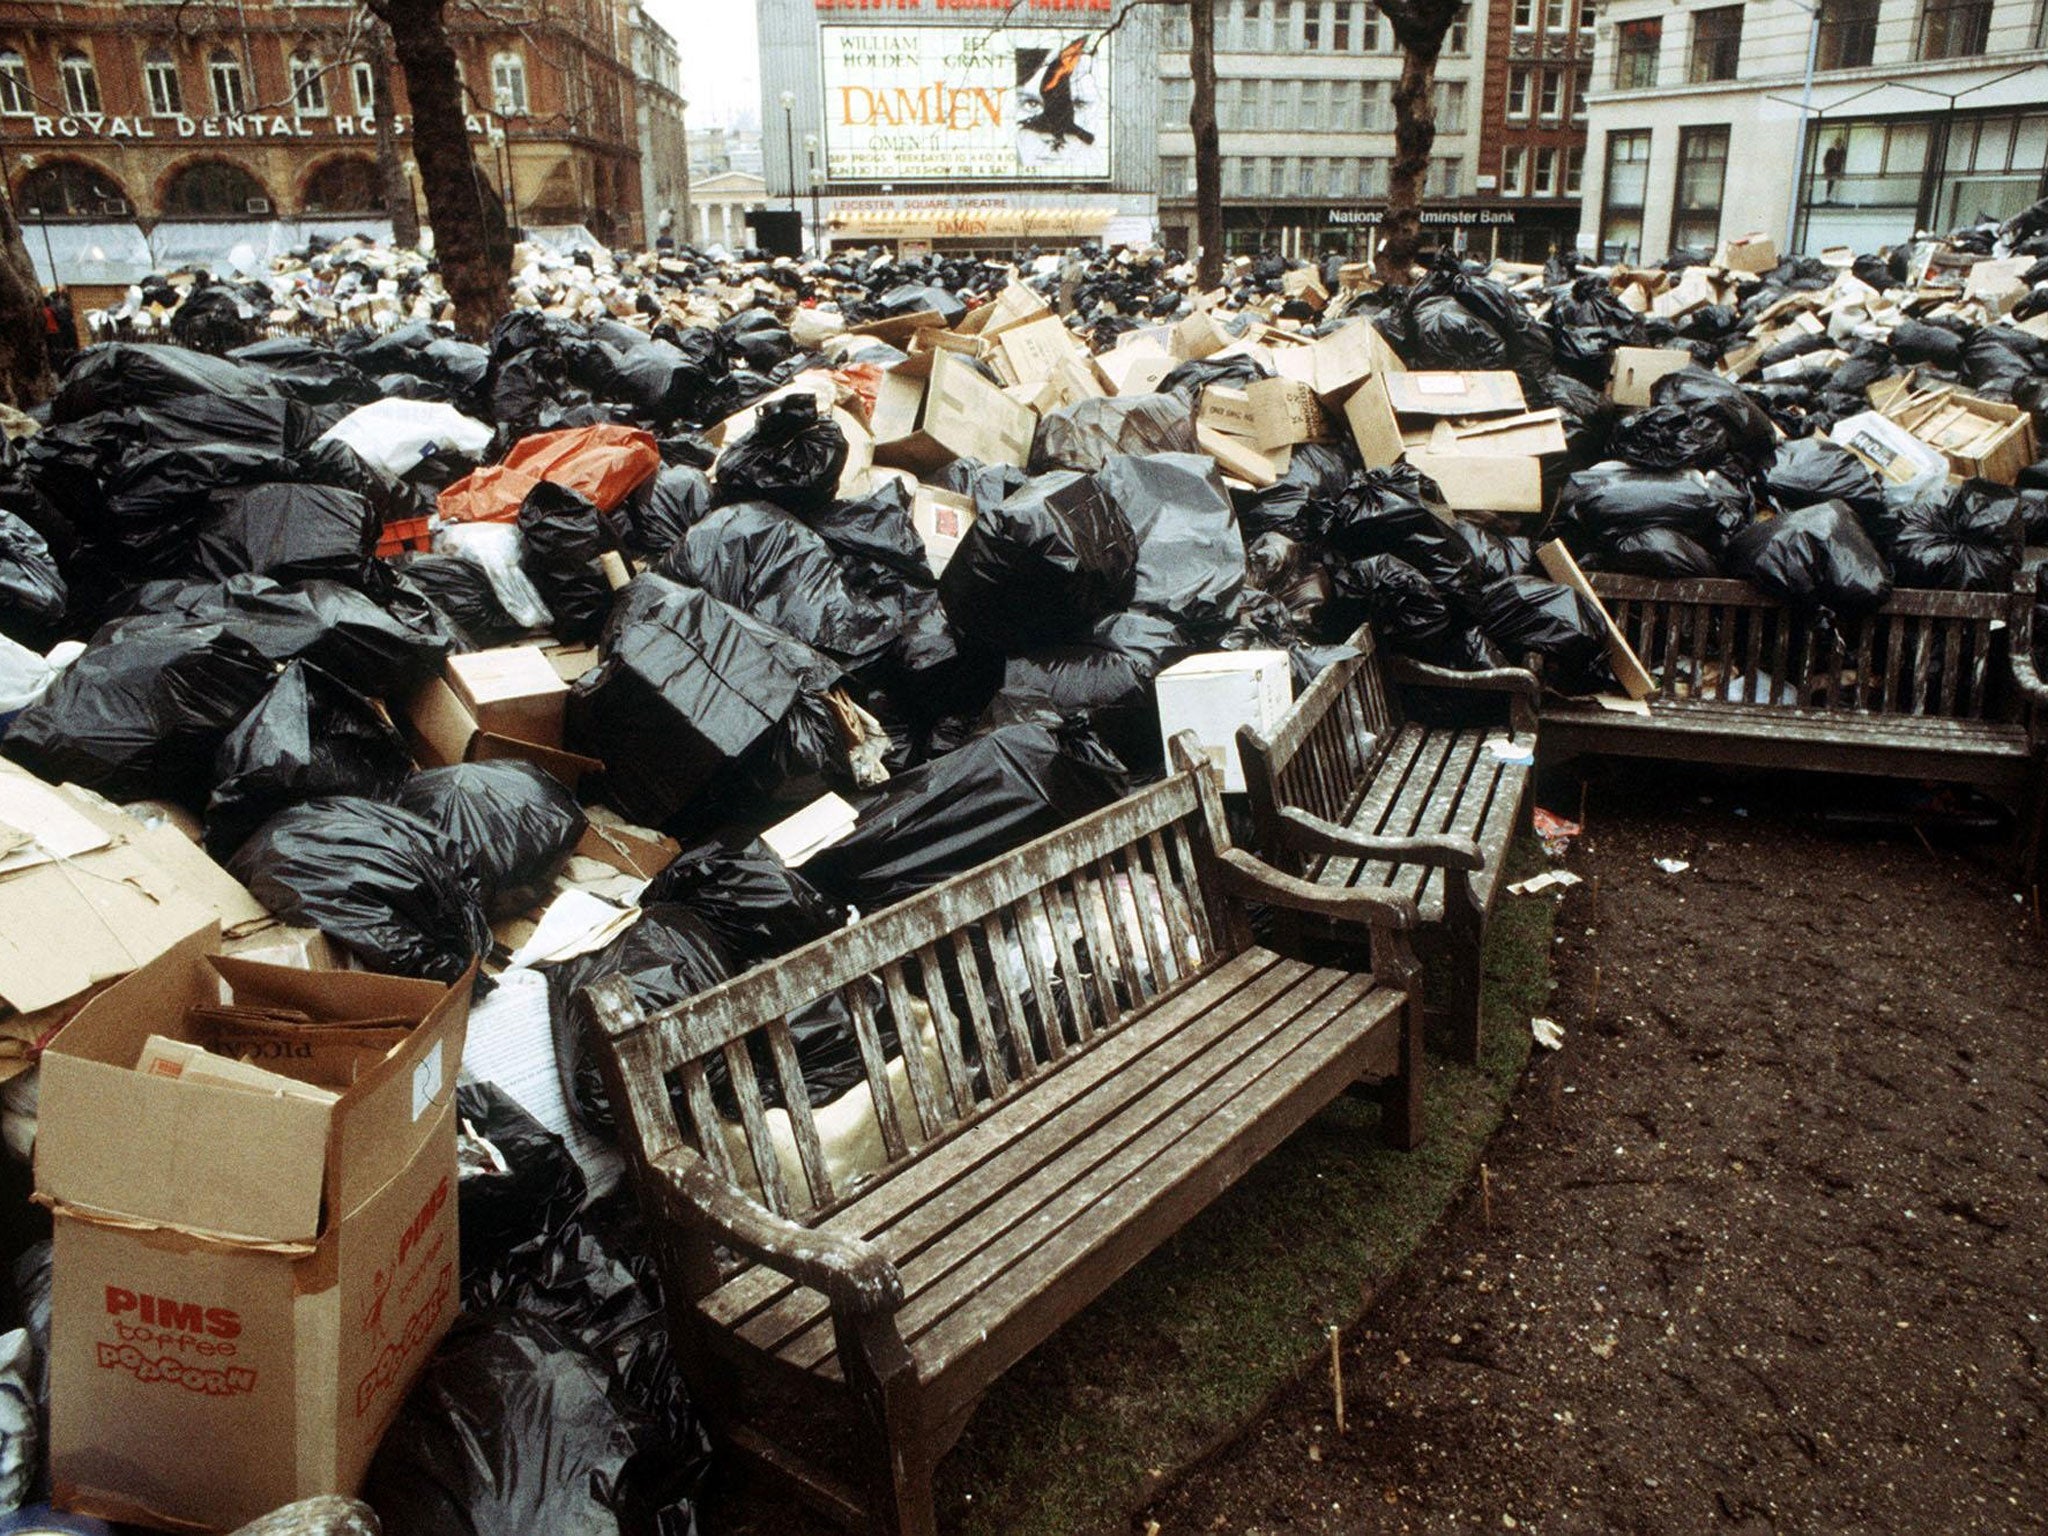 In a mess: Rubbish left uncollected during the 1979 winter of discontent, the months that saw the downfall of Jim Callaghan